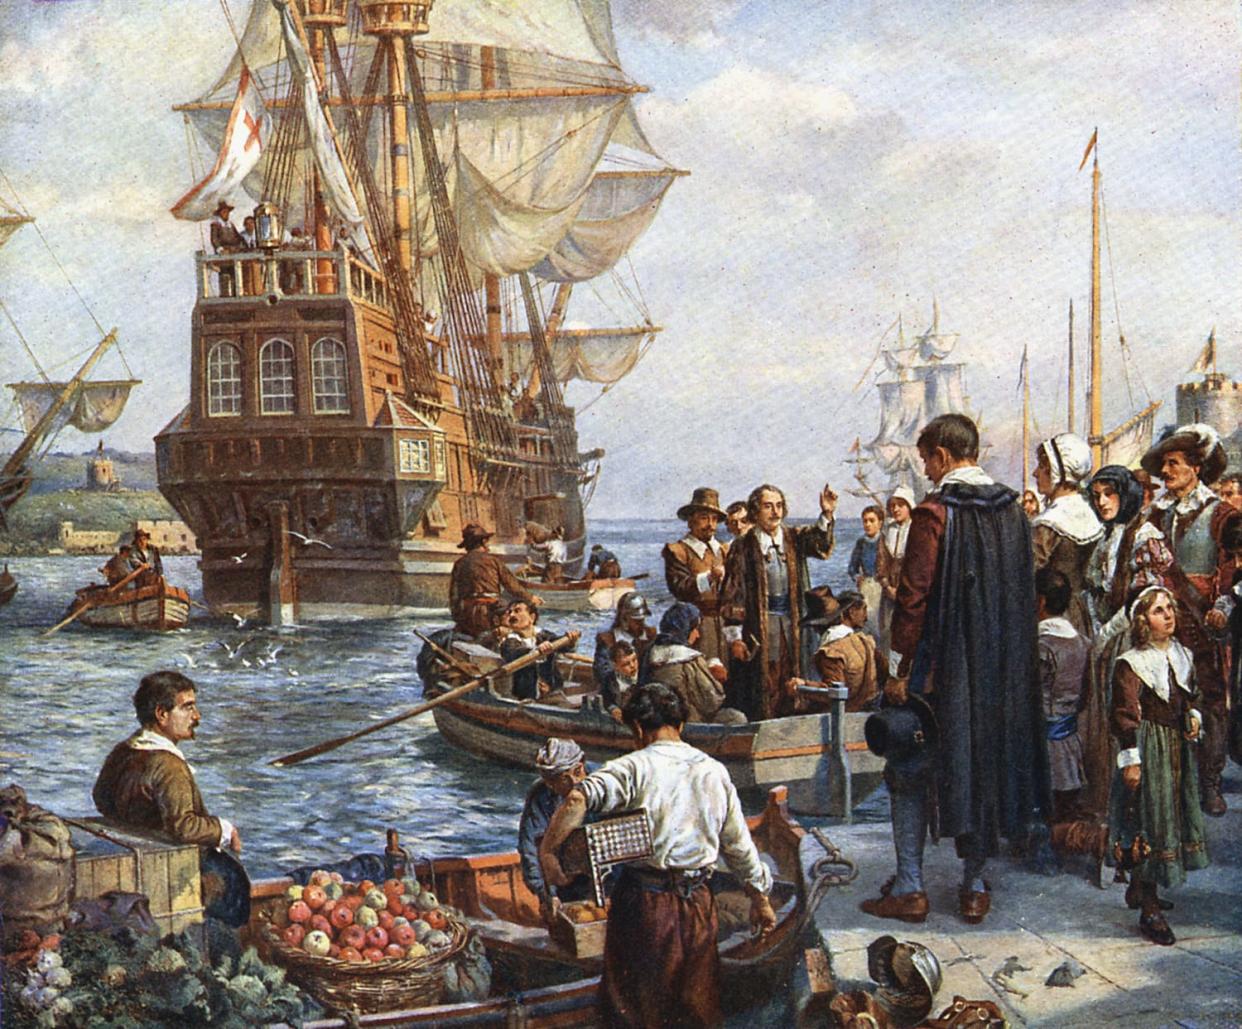 Image: Pilgrim Fathers boarding the Mayflower for their voyage to America (Ann Ronan Pictures/Print Collector / Getty Images)